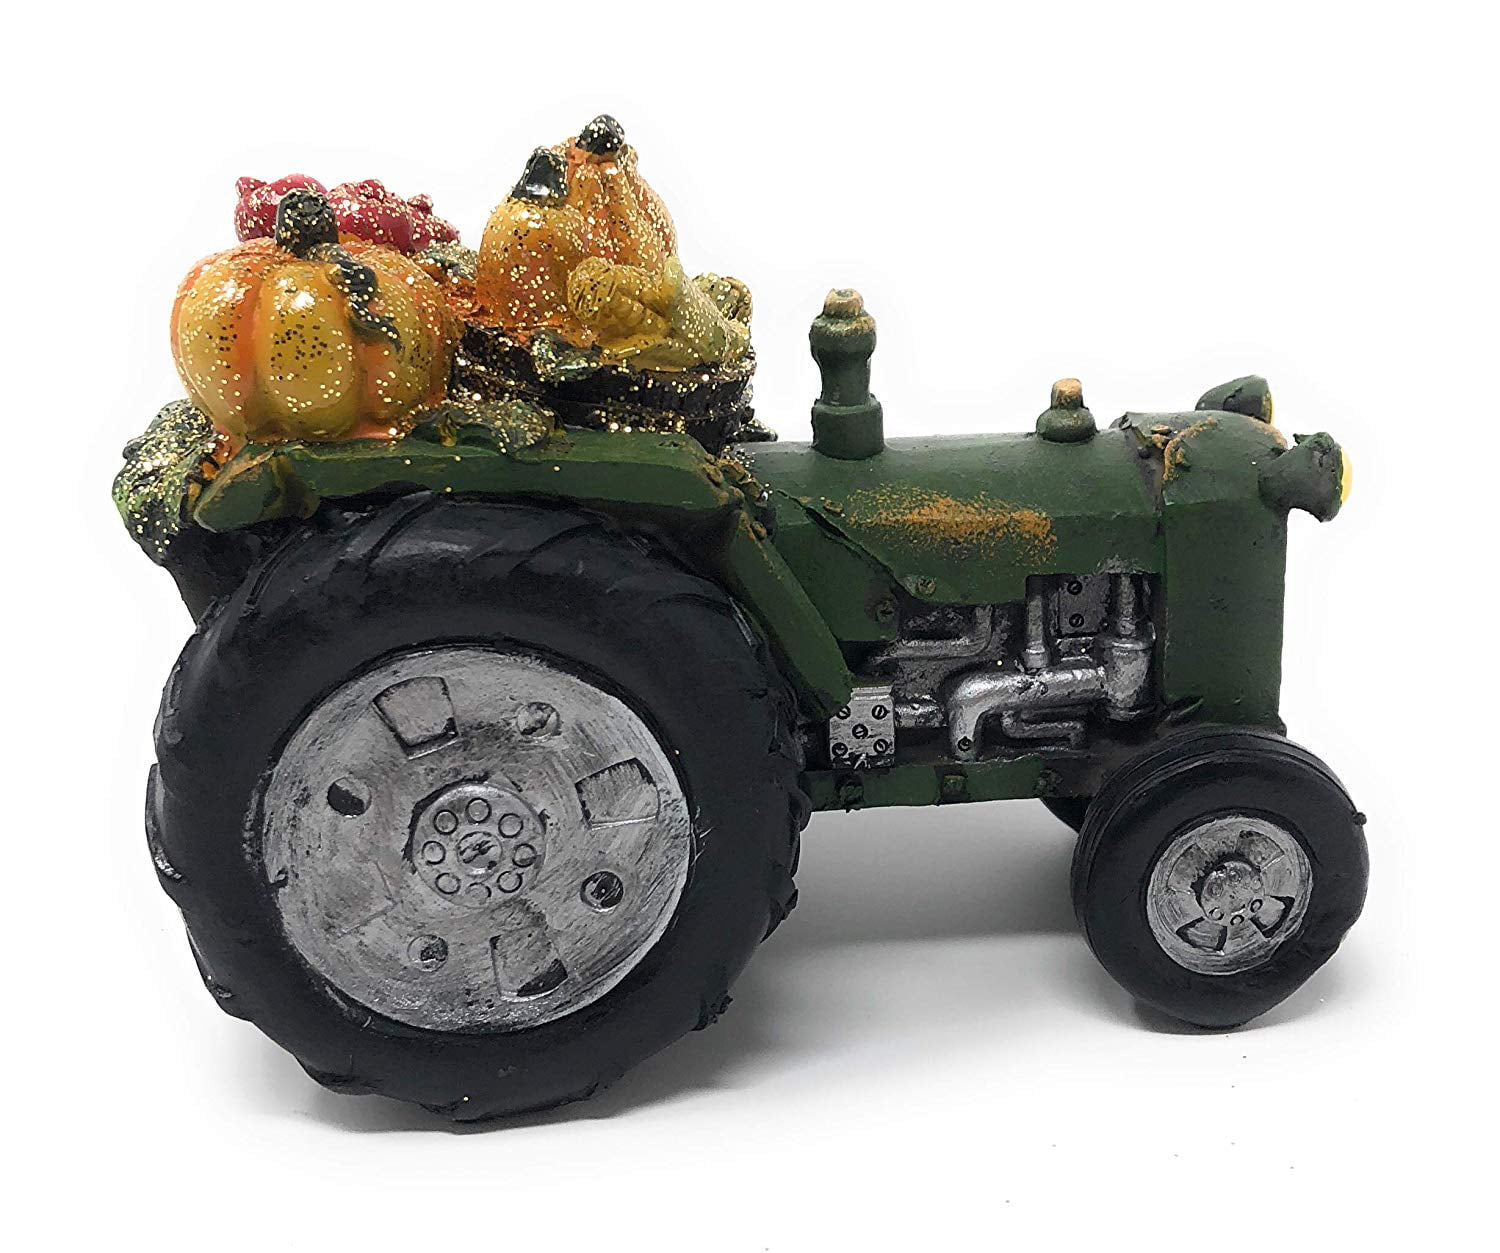 Green Harvest Tractor 6 x 4.5 Inch Resin Stone Tabletop Decorative Figurine 